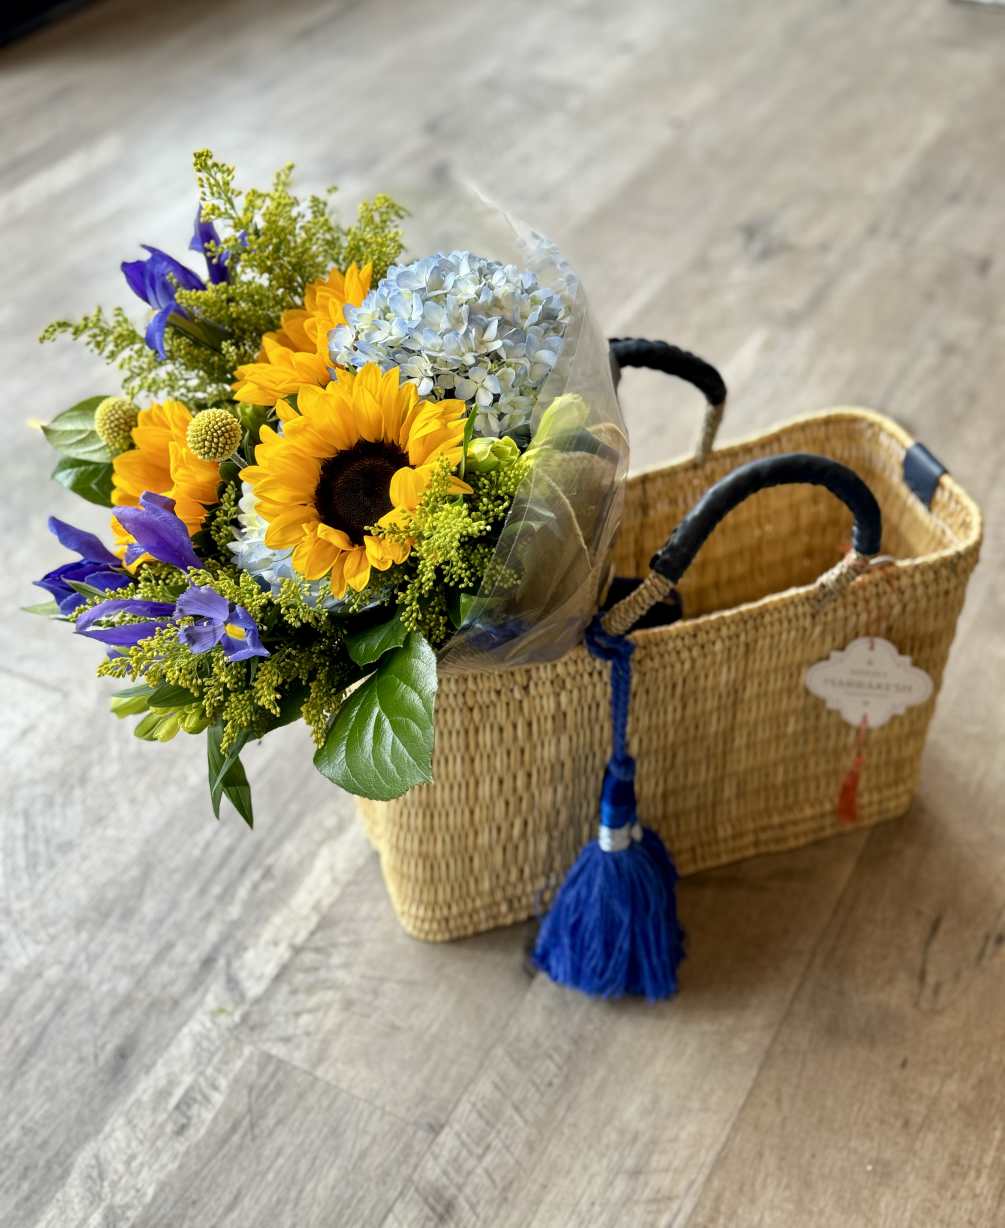 This vibrant bouquet features a stunning combo of blue hydrangea, cheerful sunflowers